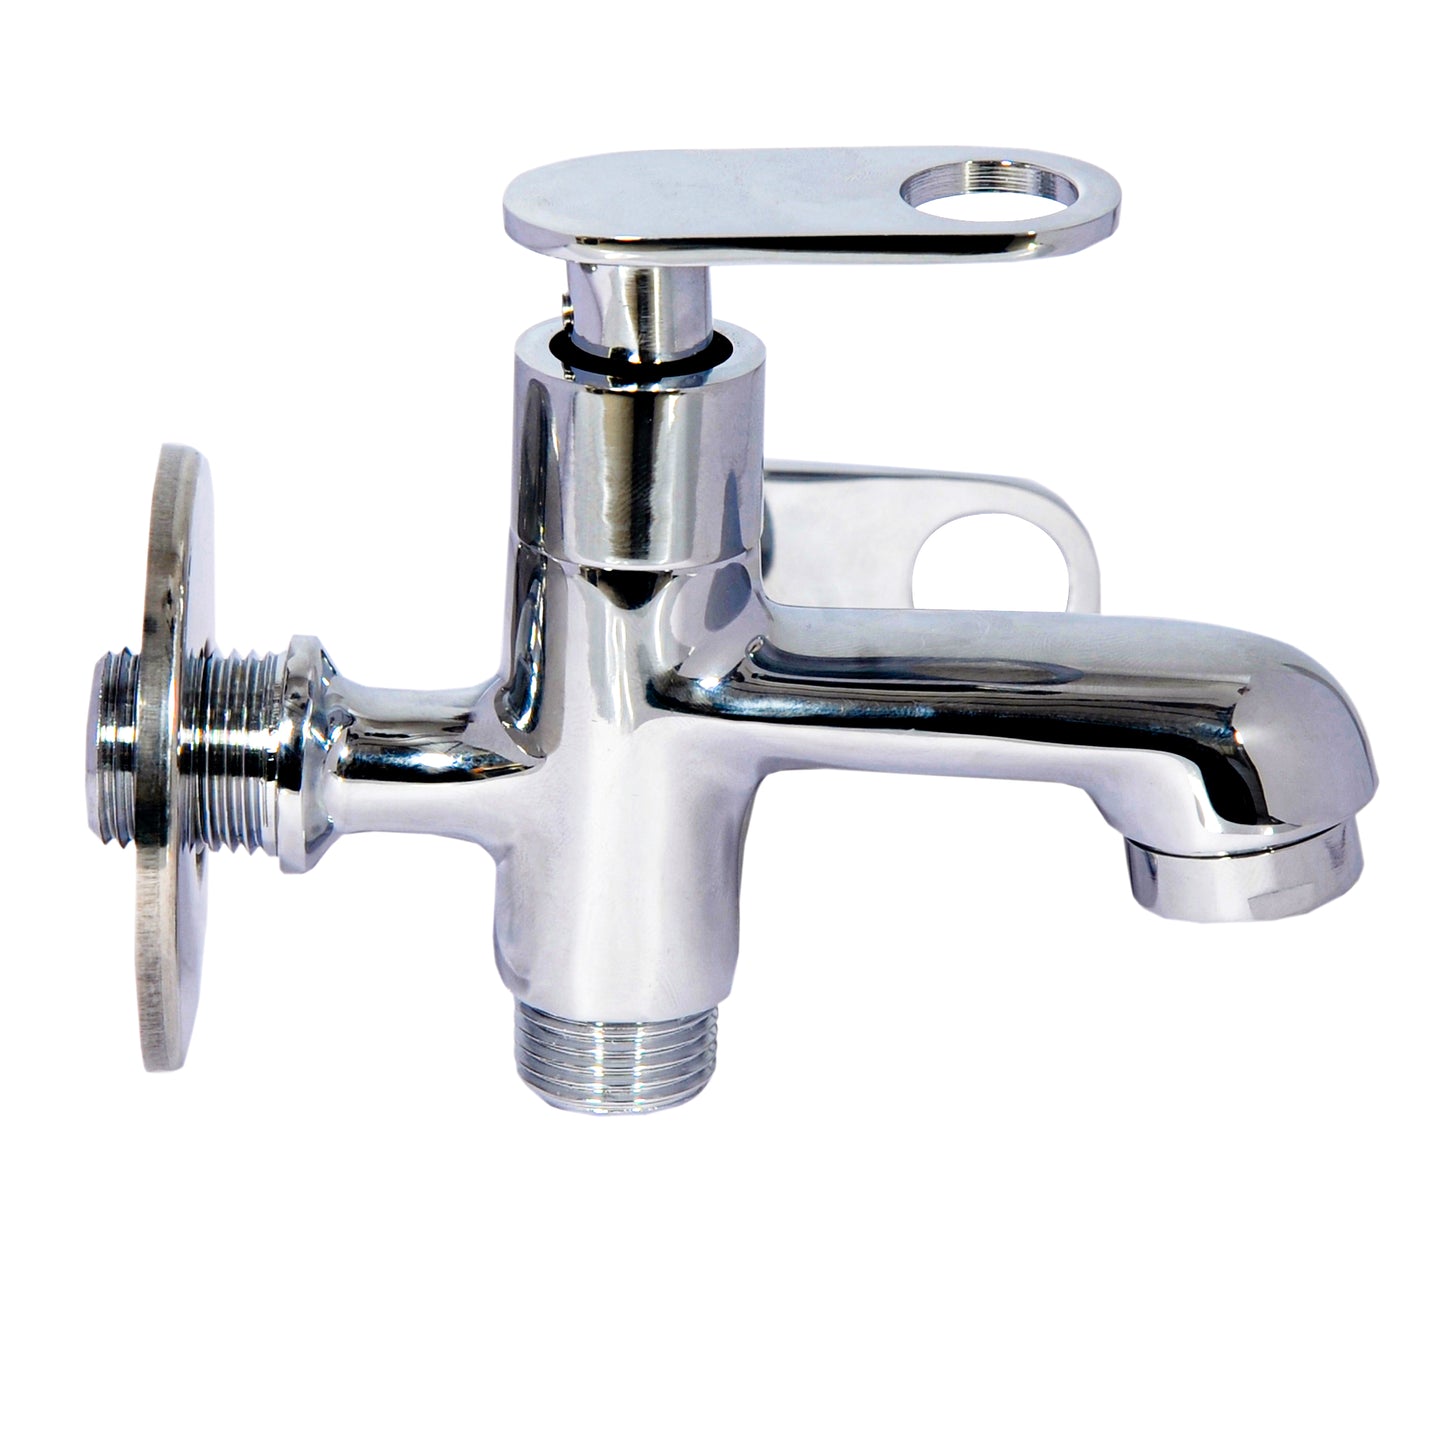 T2-01 2-in-1 Bibcock tap with Wall Flange